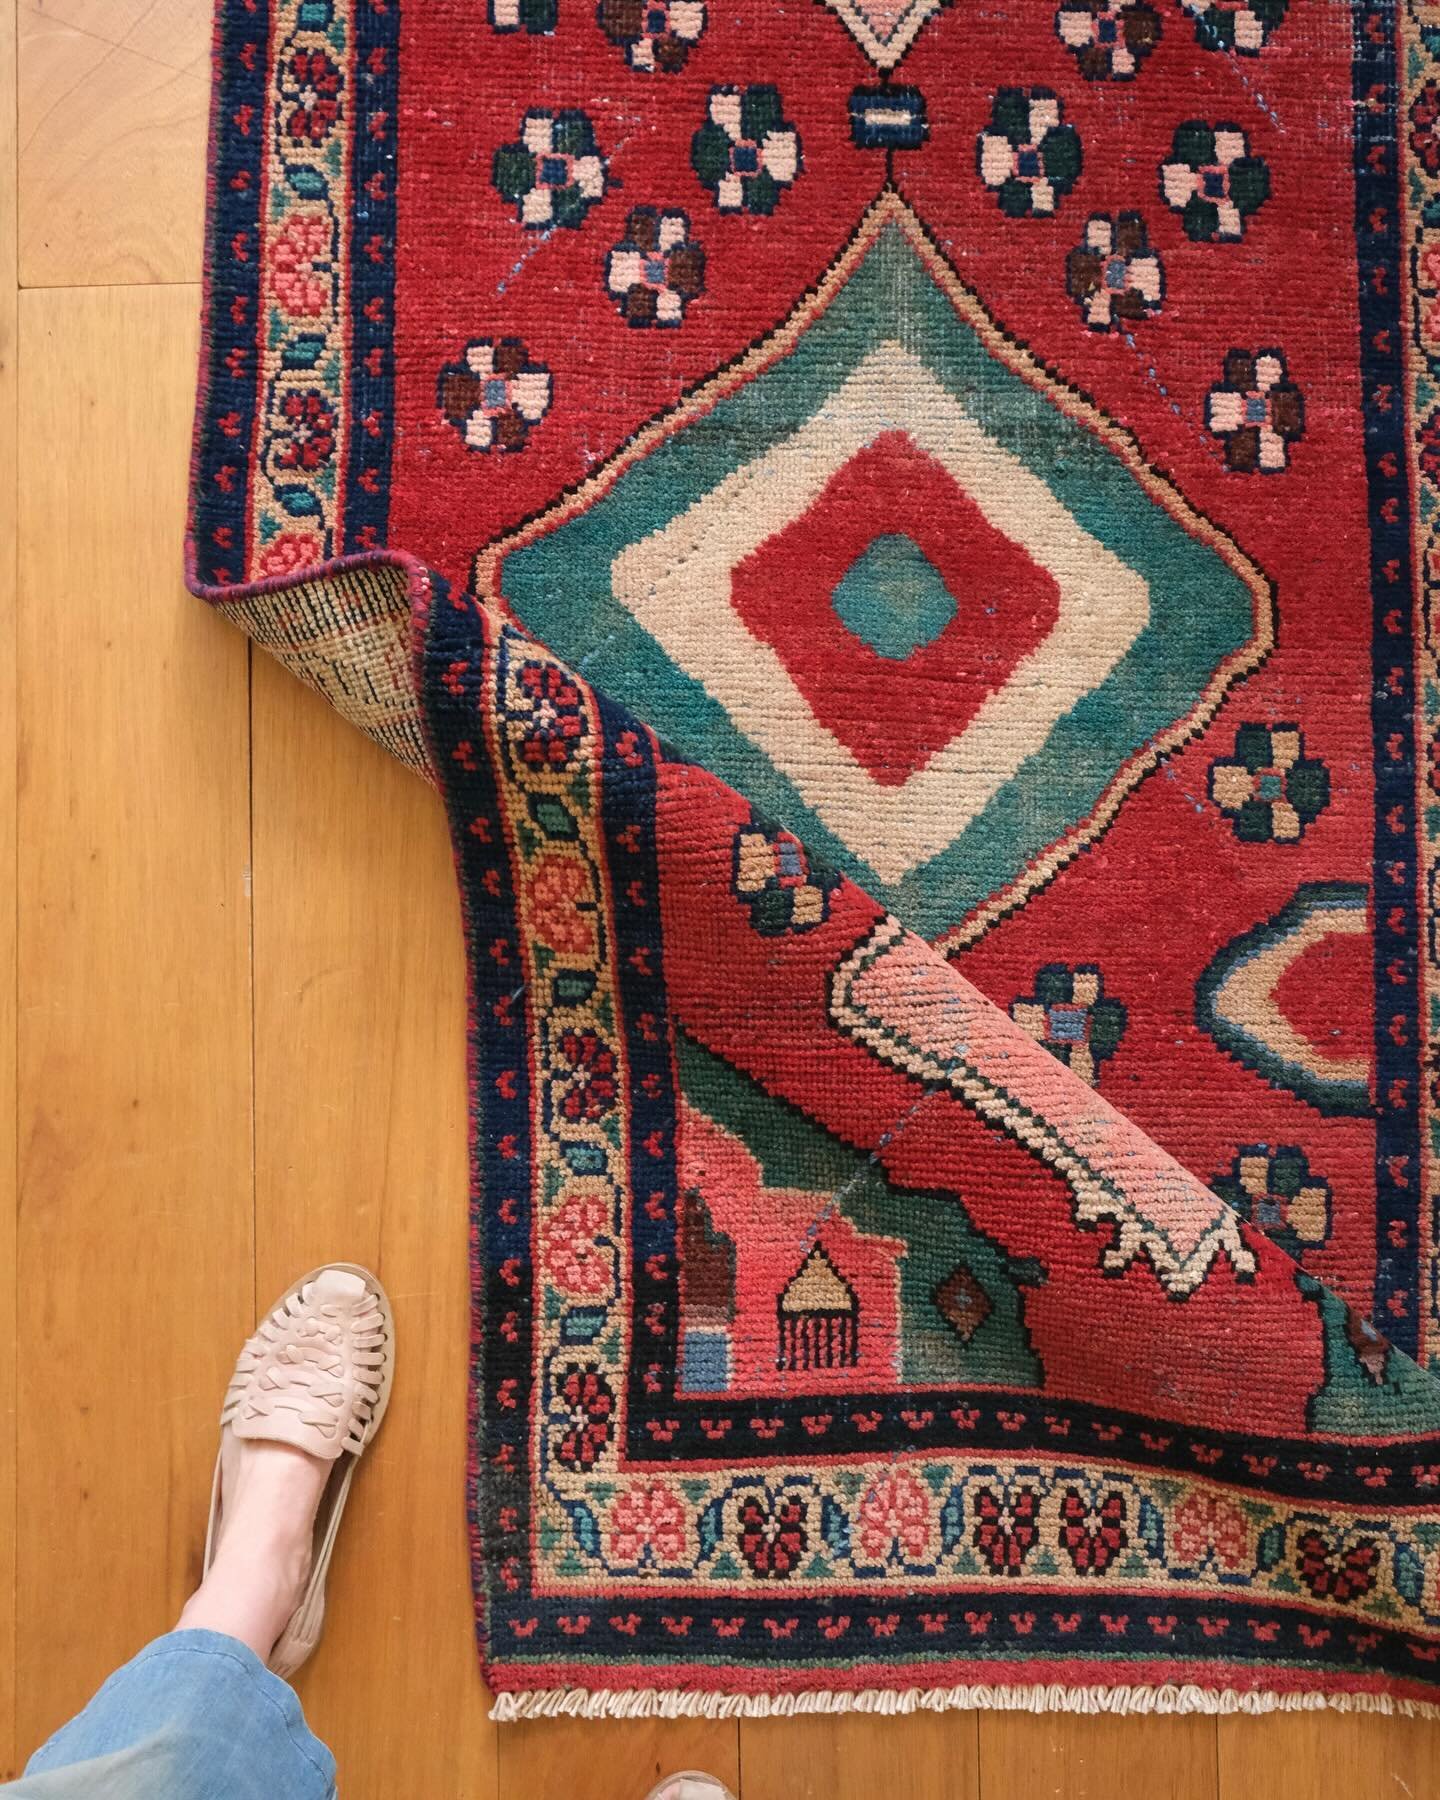 This weeks batch of vintage rugs just landed in the webshop〰️
.
.
.
Image Description: a carousel of images of this weeks batch, each pictures showing the handle of the rug aka the drape shown by folding the rug over itself
.
.
.
#vintage #vintagerug